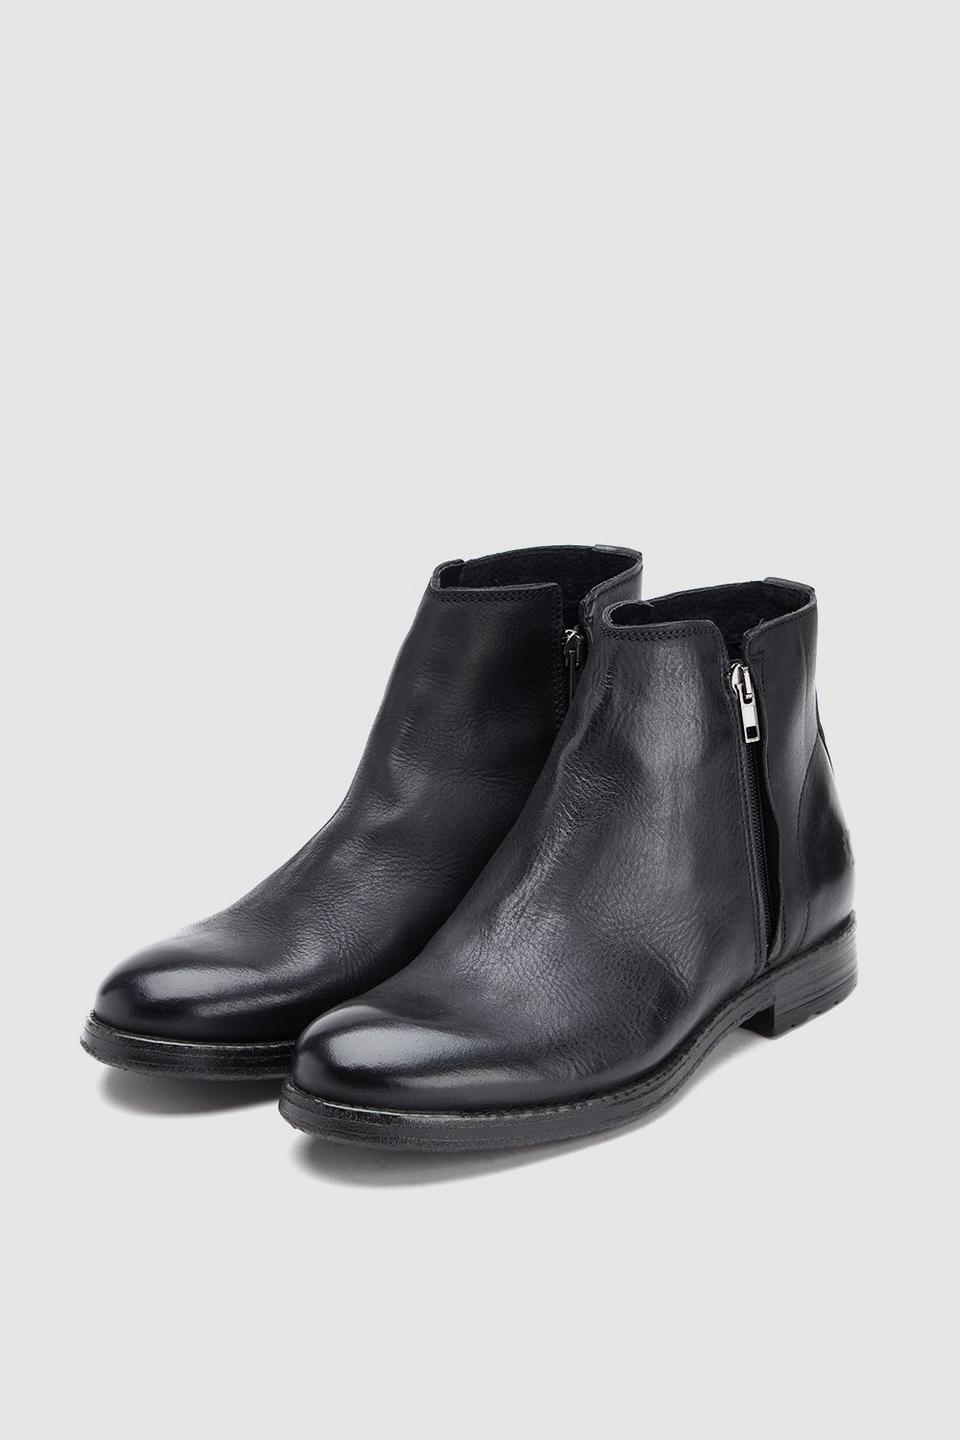 Boots | 'Dillinger' Leather Zip Up Chelsea Boots | Base London